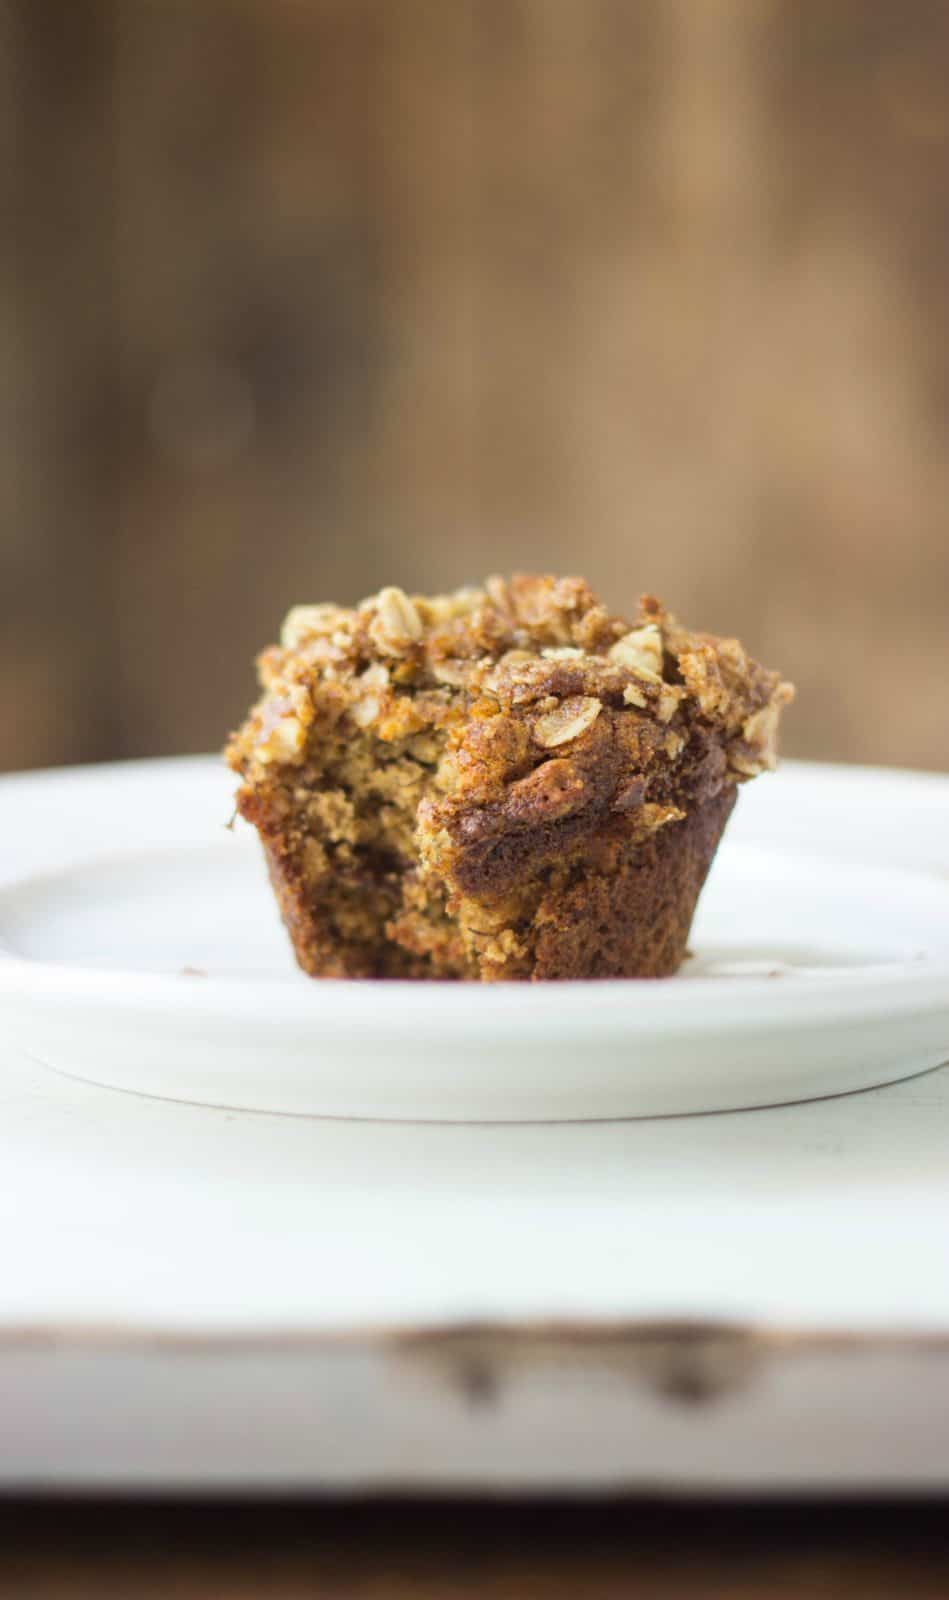 Banana crunch muffins as one of the six ways to use up ripe bananas. 